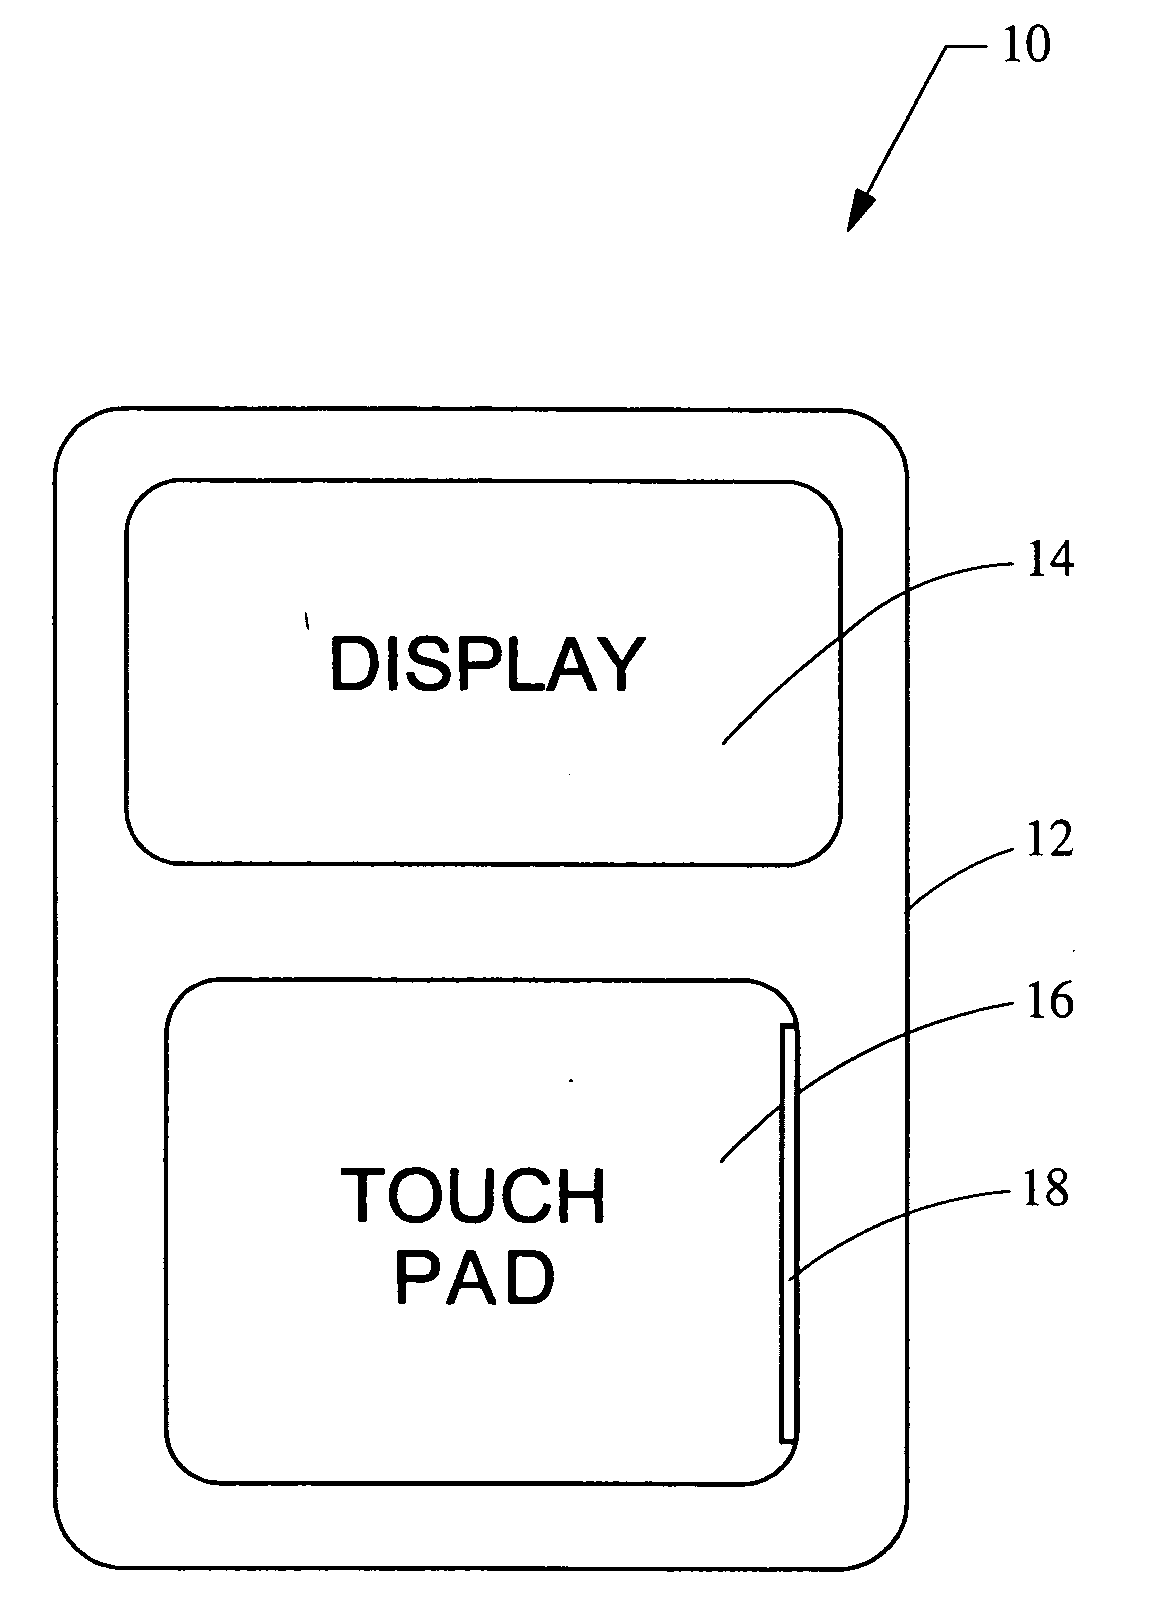 Radio system with touch pad interface